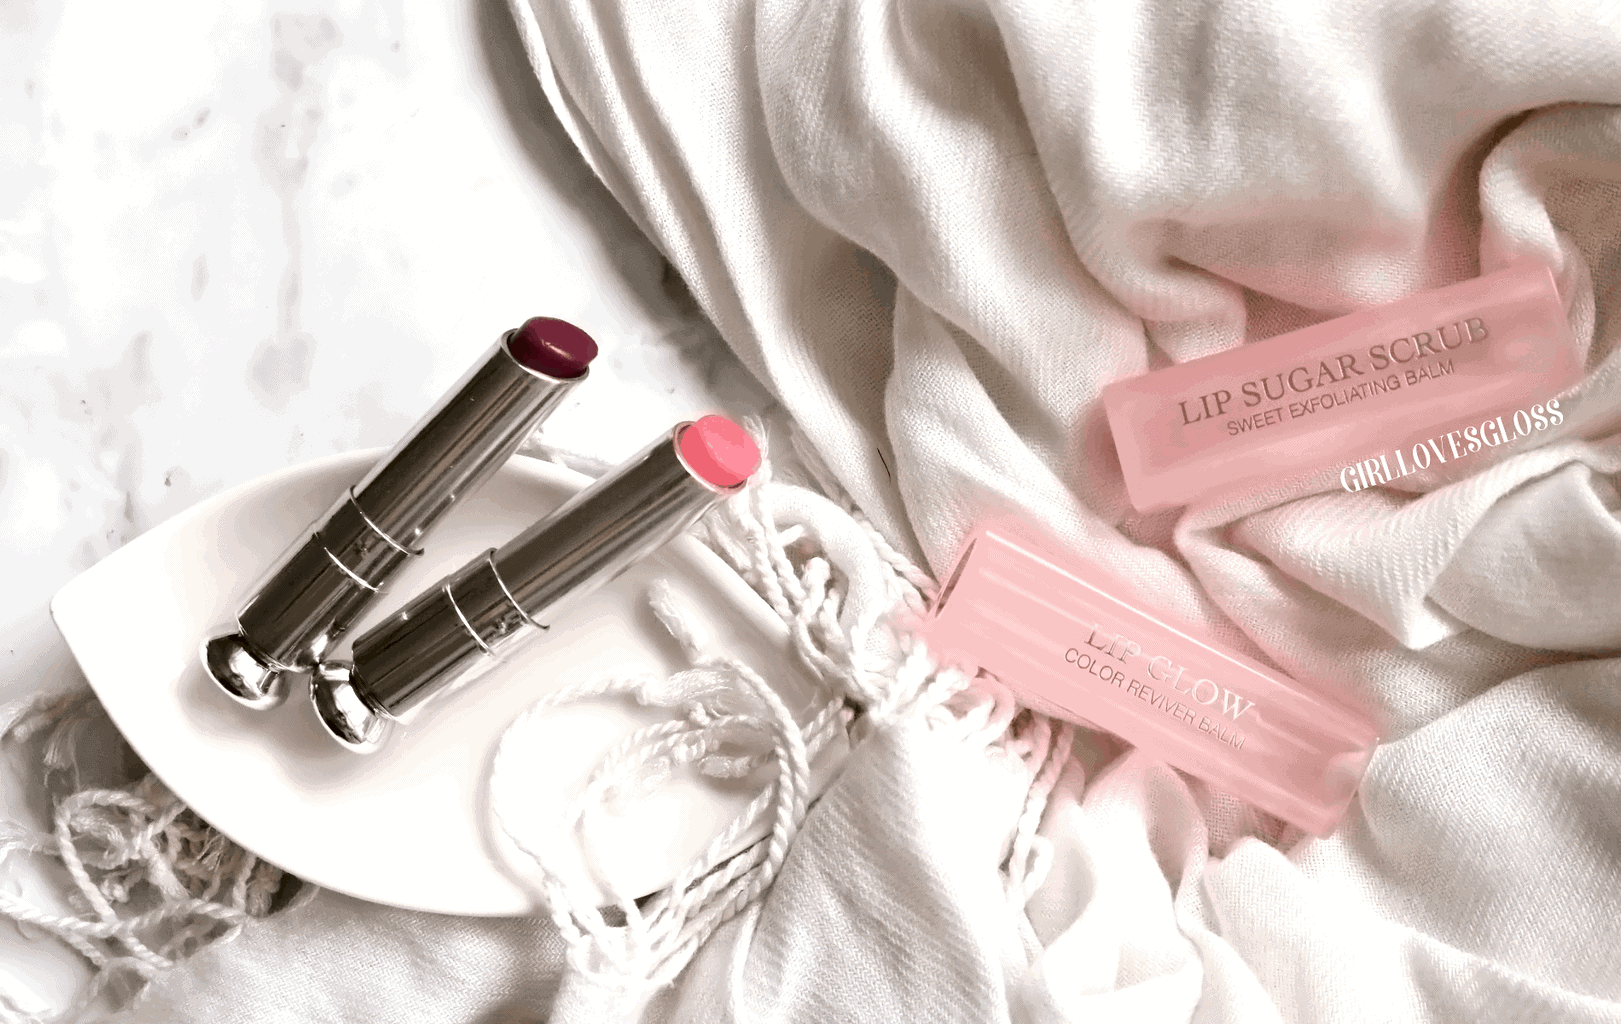 Dior Lip Glow and Lip Sugar Scrub Review and Swatches